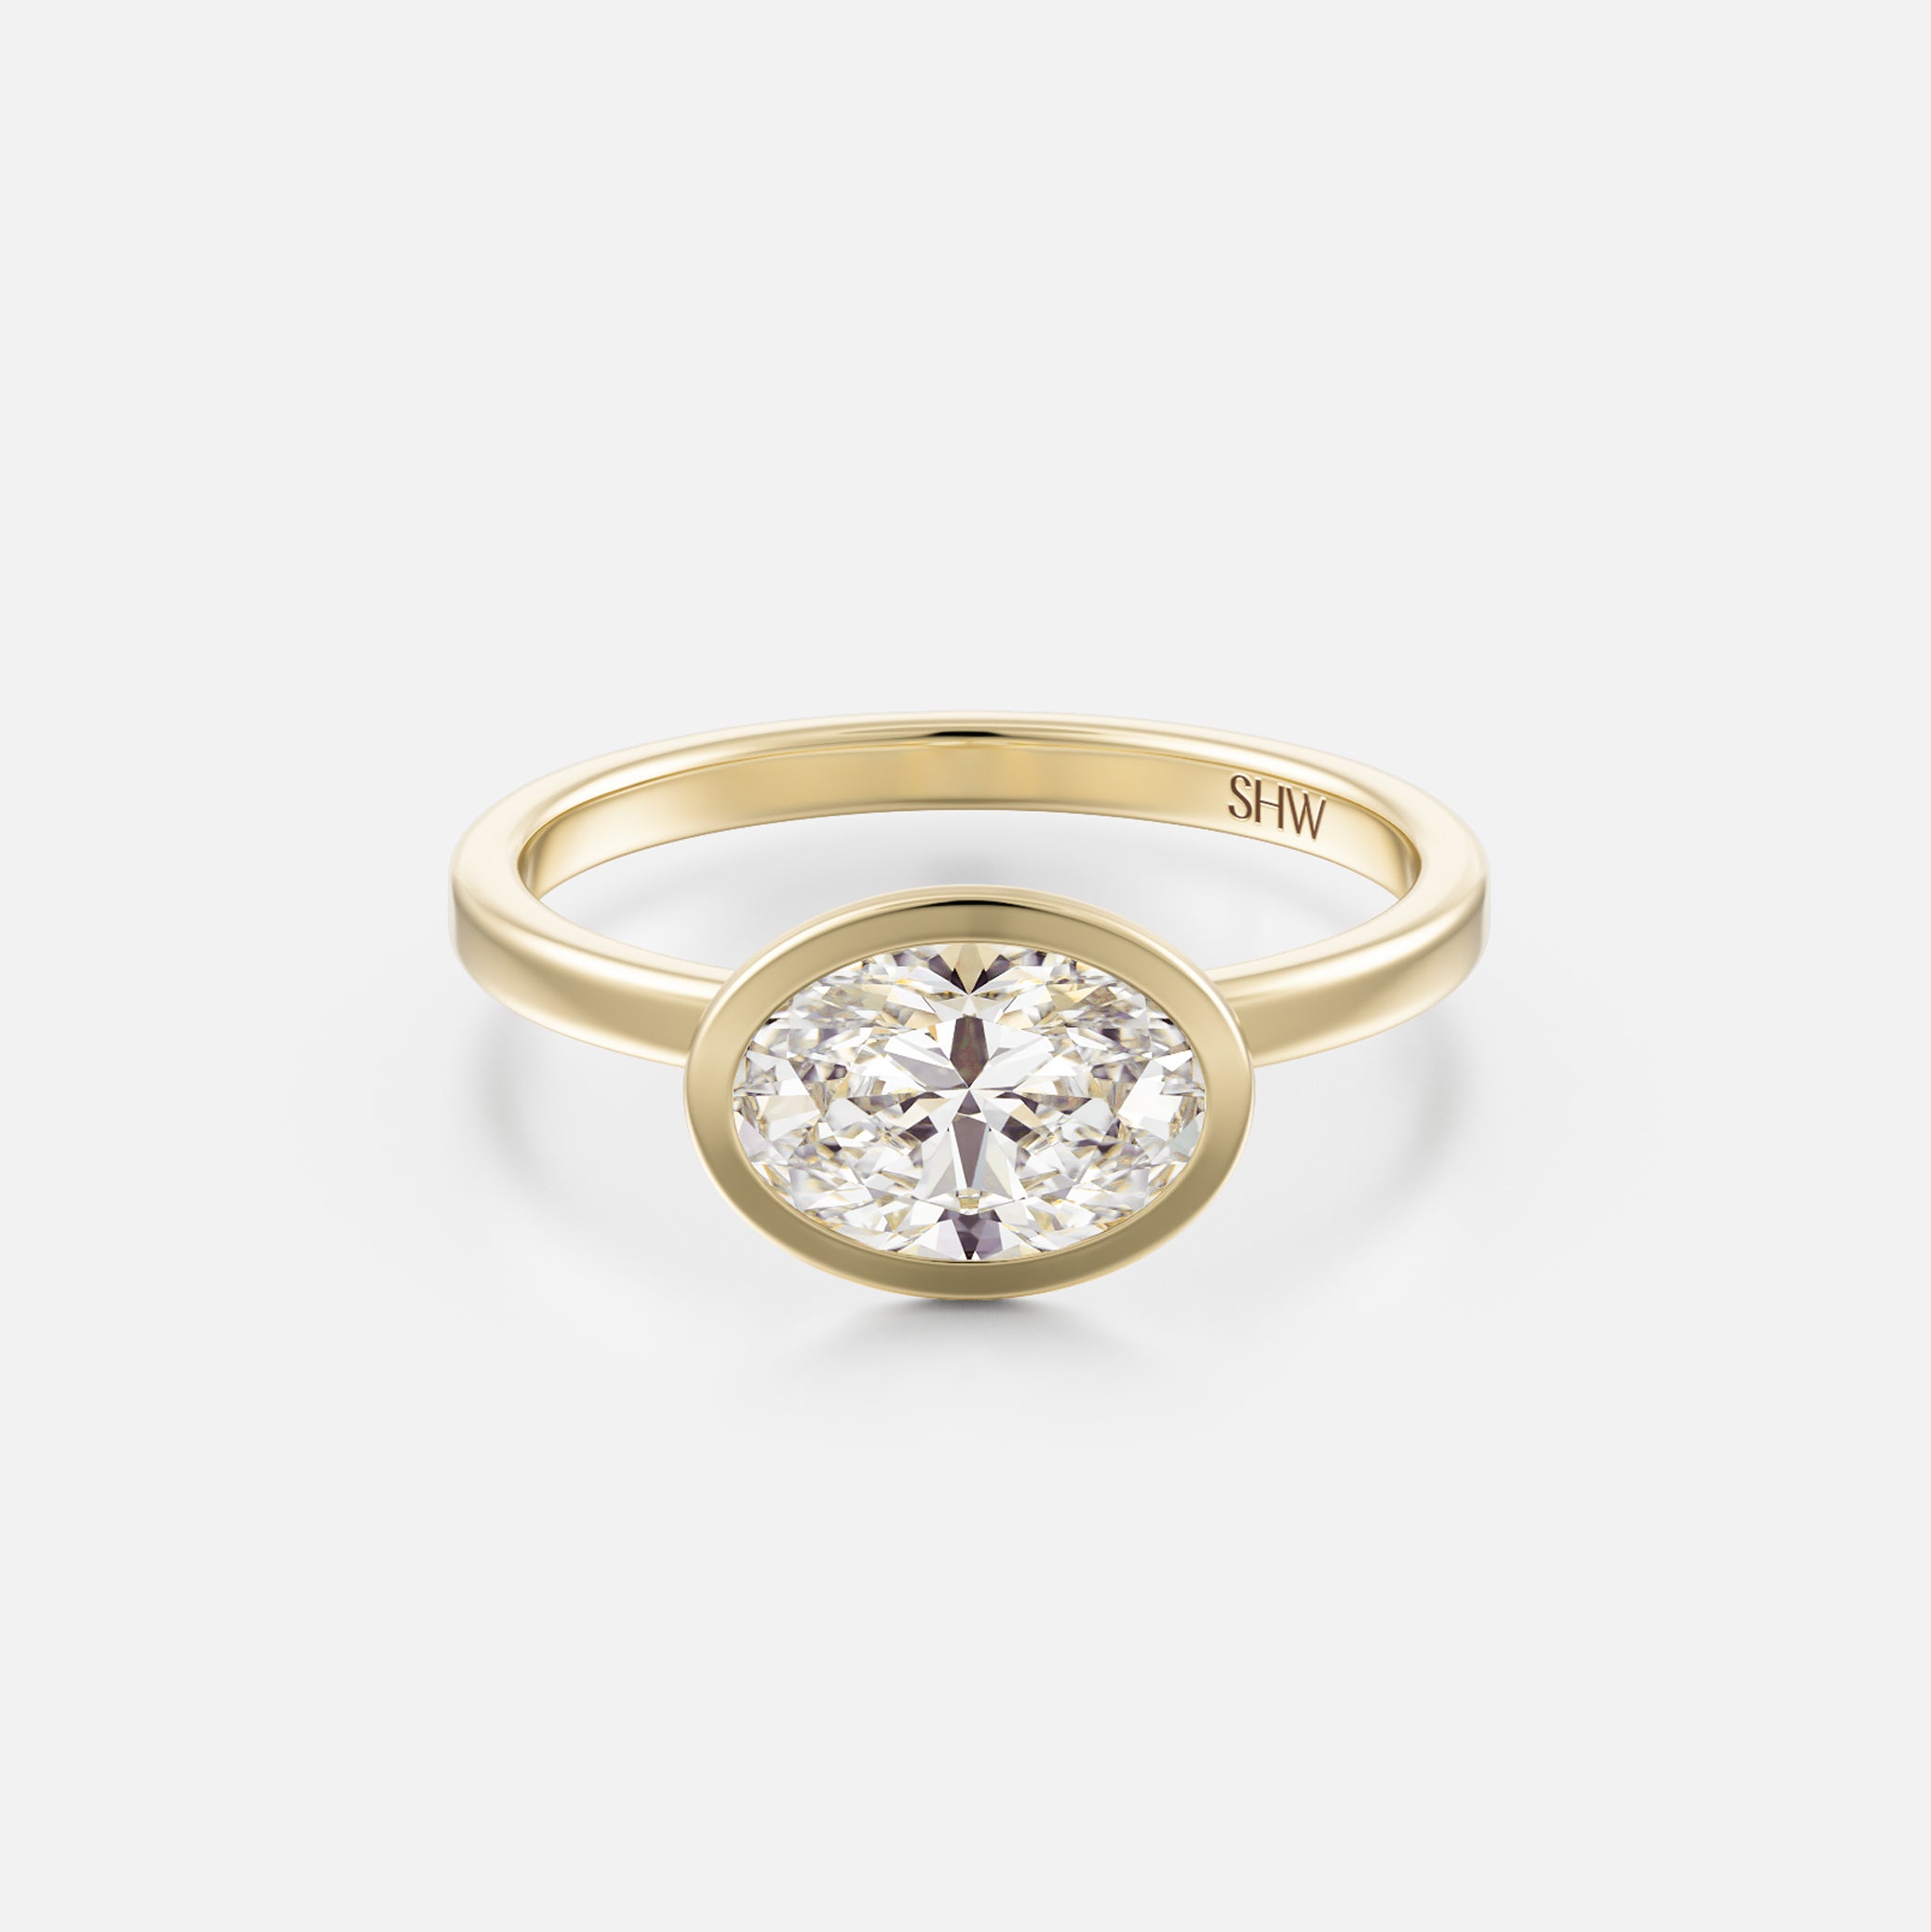 Mana Square Band with East West Oval Simple Engagement Ring Setting in sustainable 14k Gold or platinum by SHW Fine Jewelry NYC